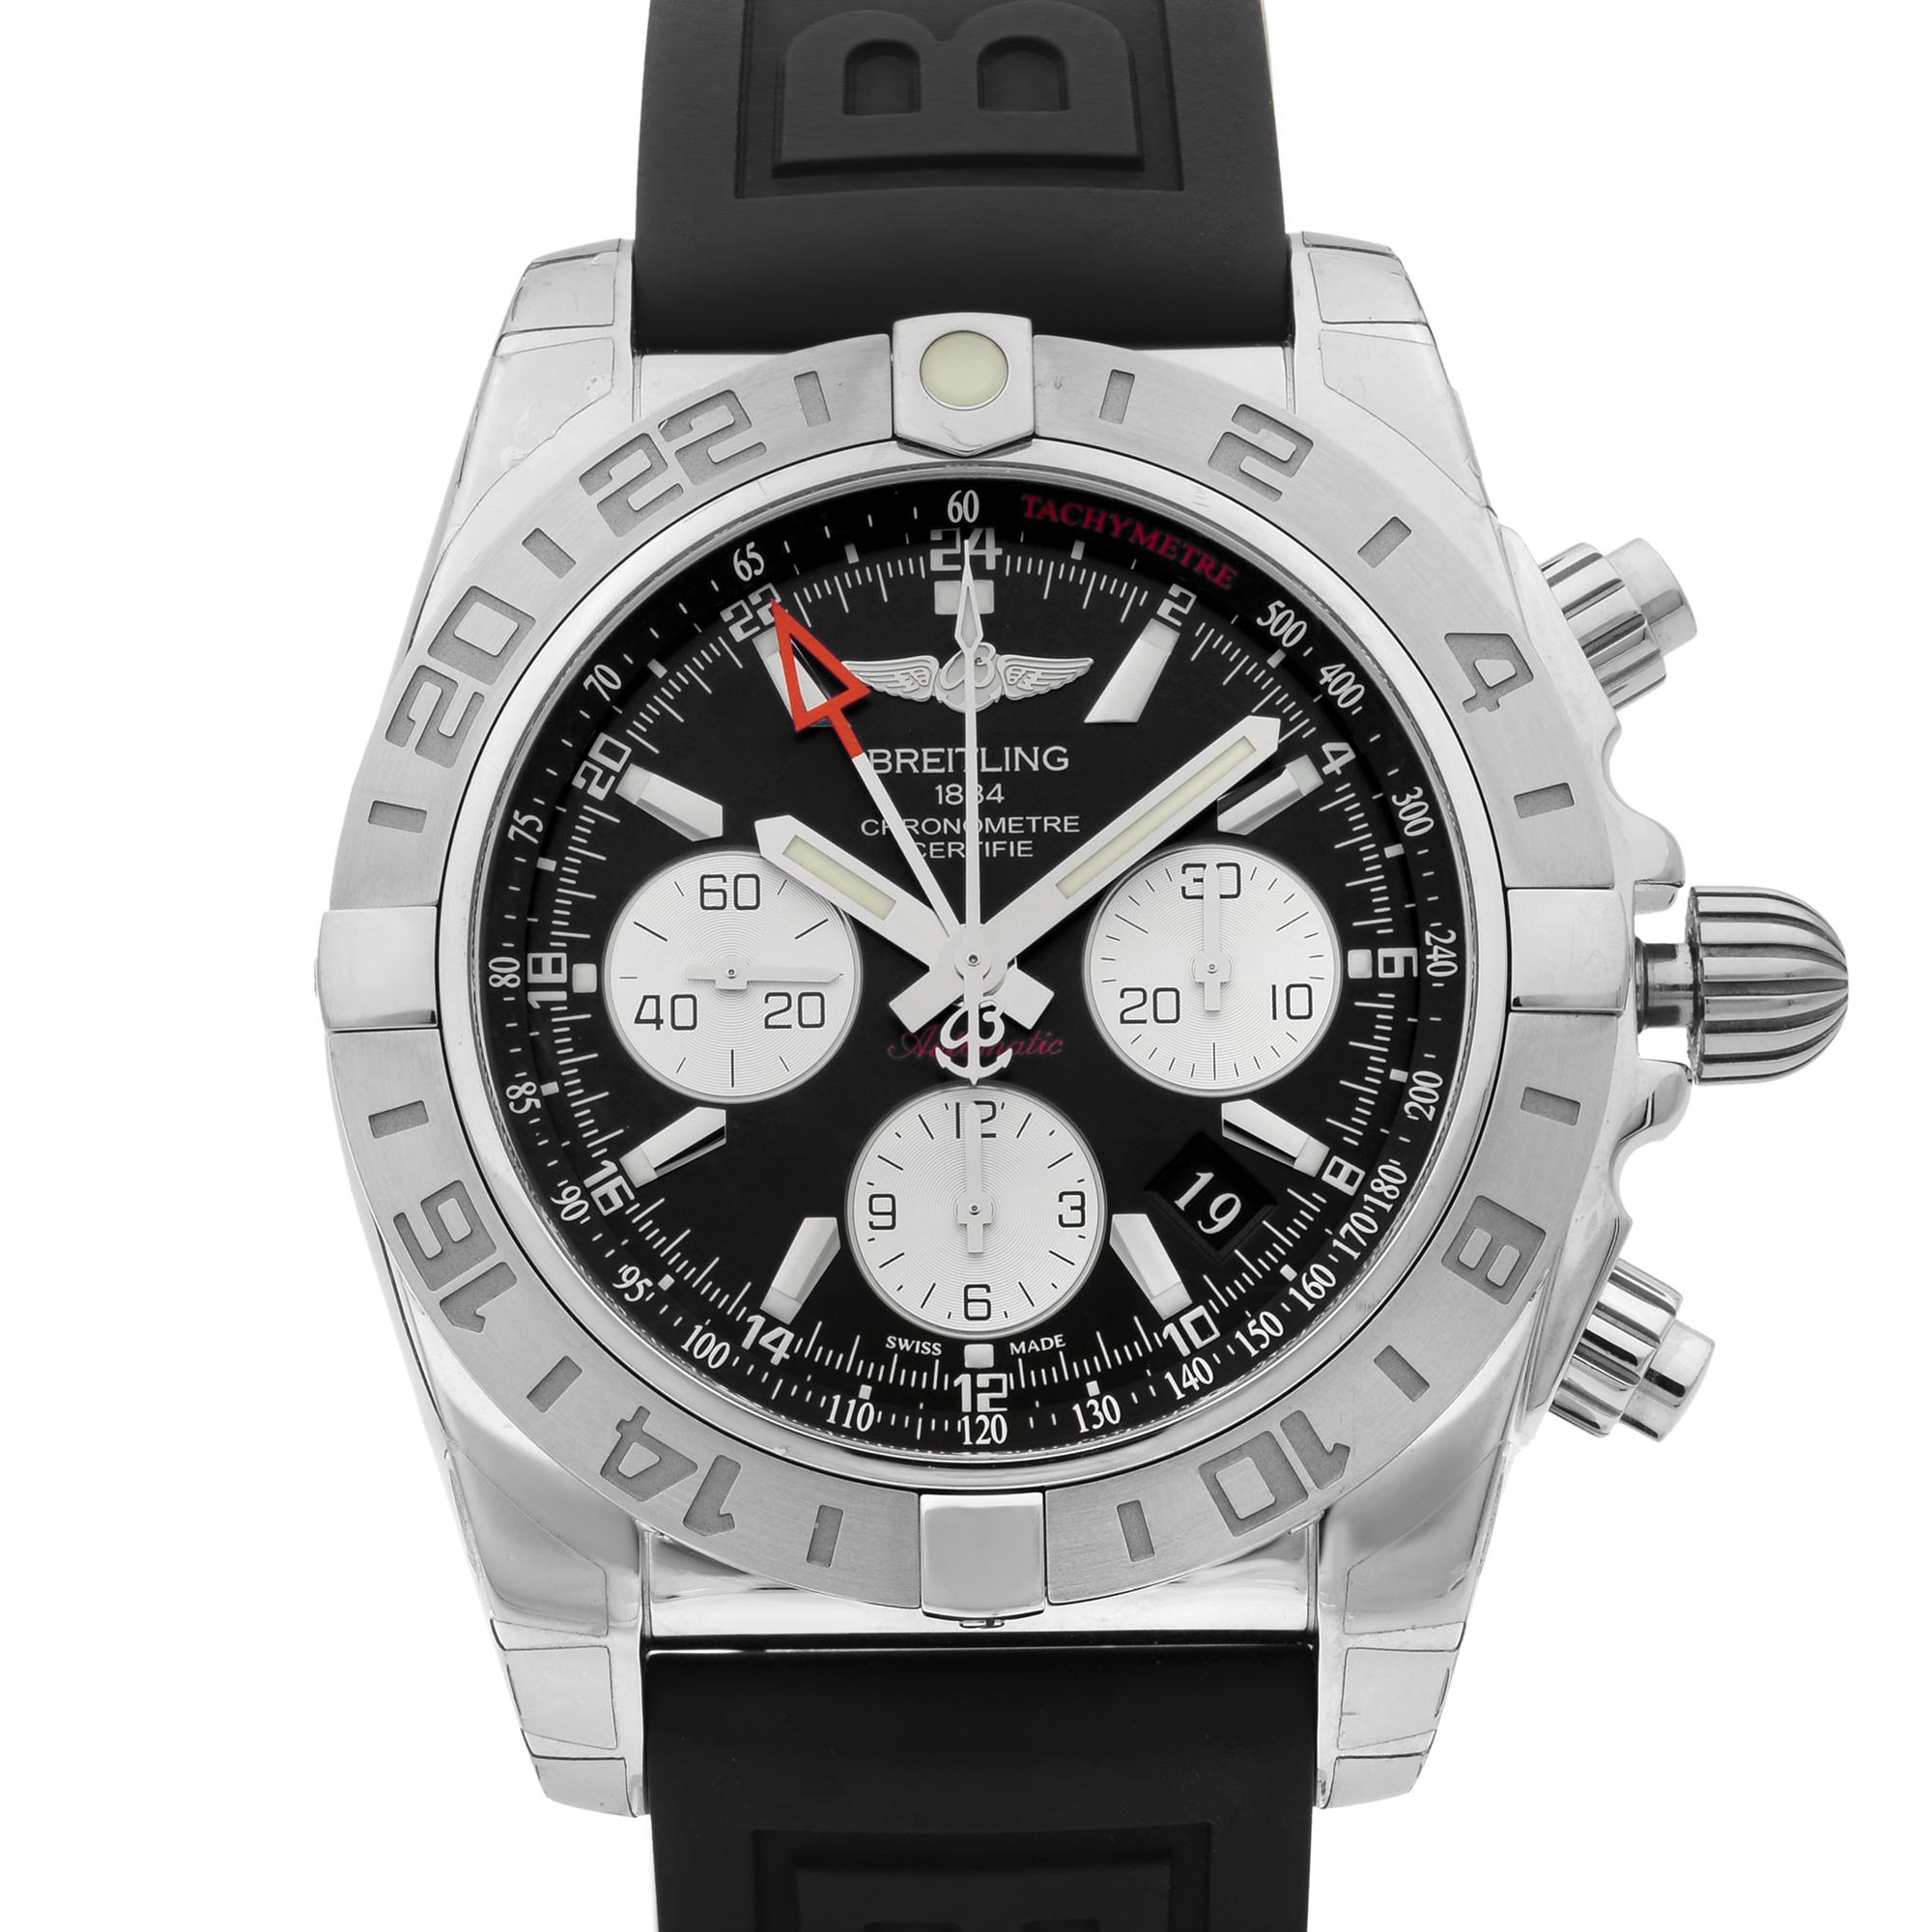 This display model Breitling Chronomat 44 AB042011/BB56-153S is a beautiful men's timepiece that is powered by a mechanical (automatic) movement which is cased in a stainless steel case. It has a round shape face, chronograph, date indicator, dual